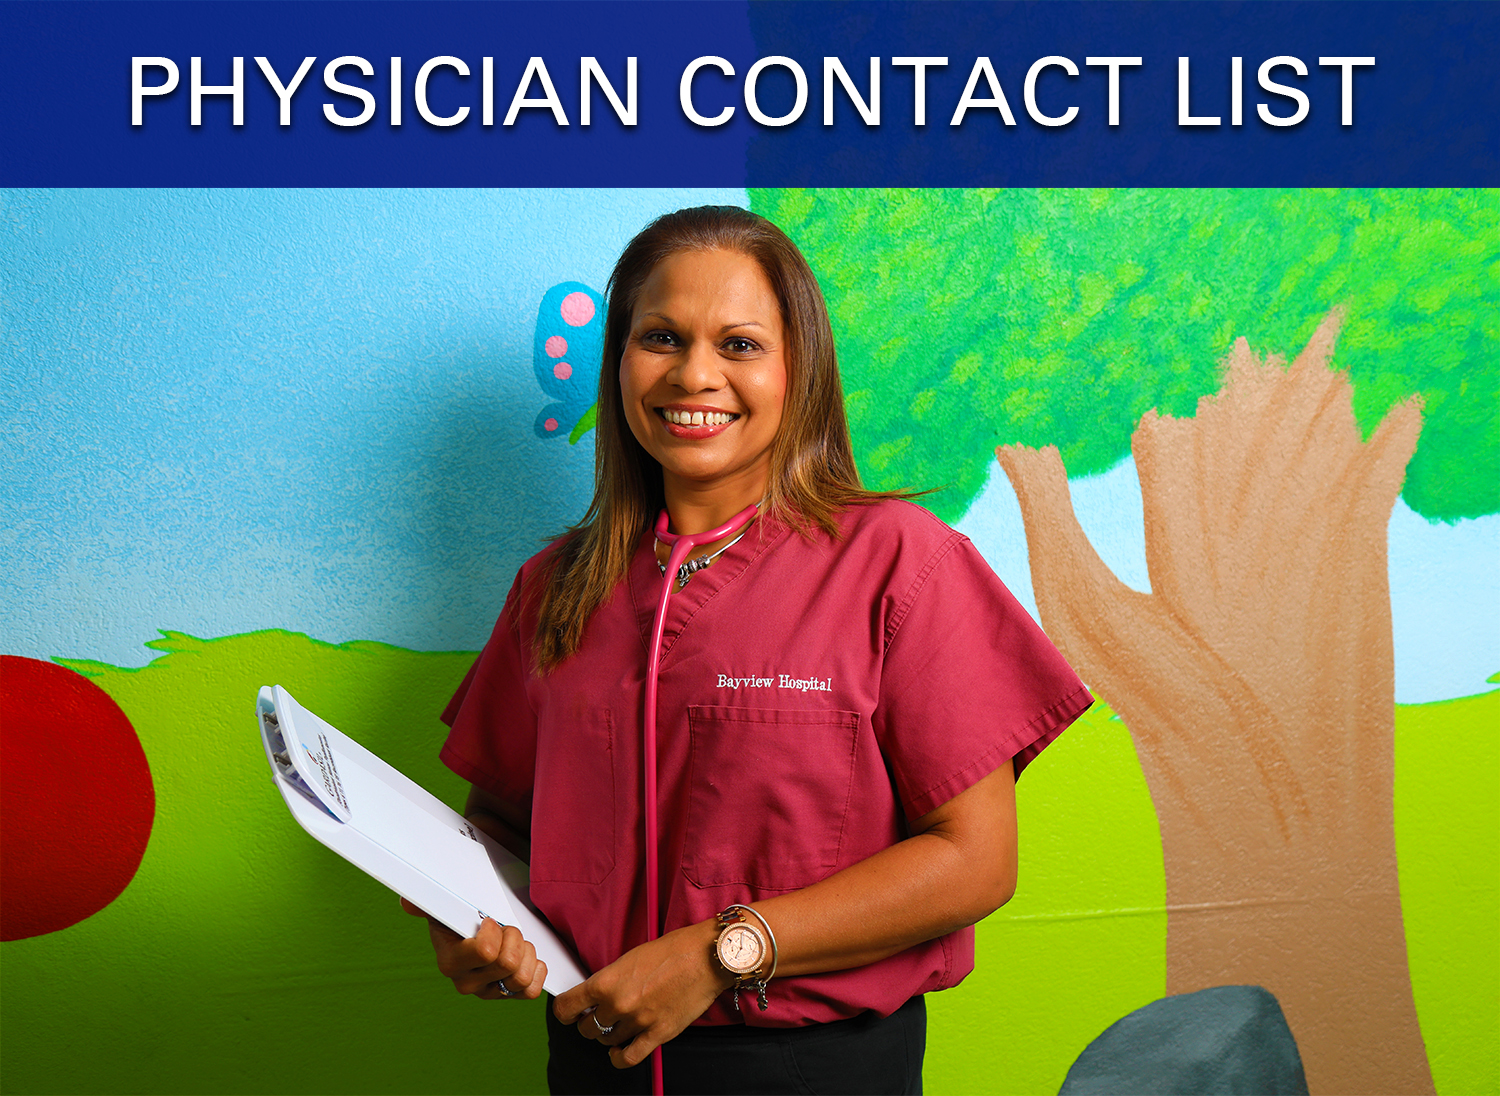 Bayview Hospital - Physician-Contact-List-Image